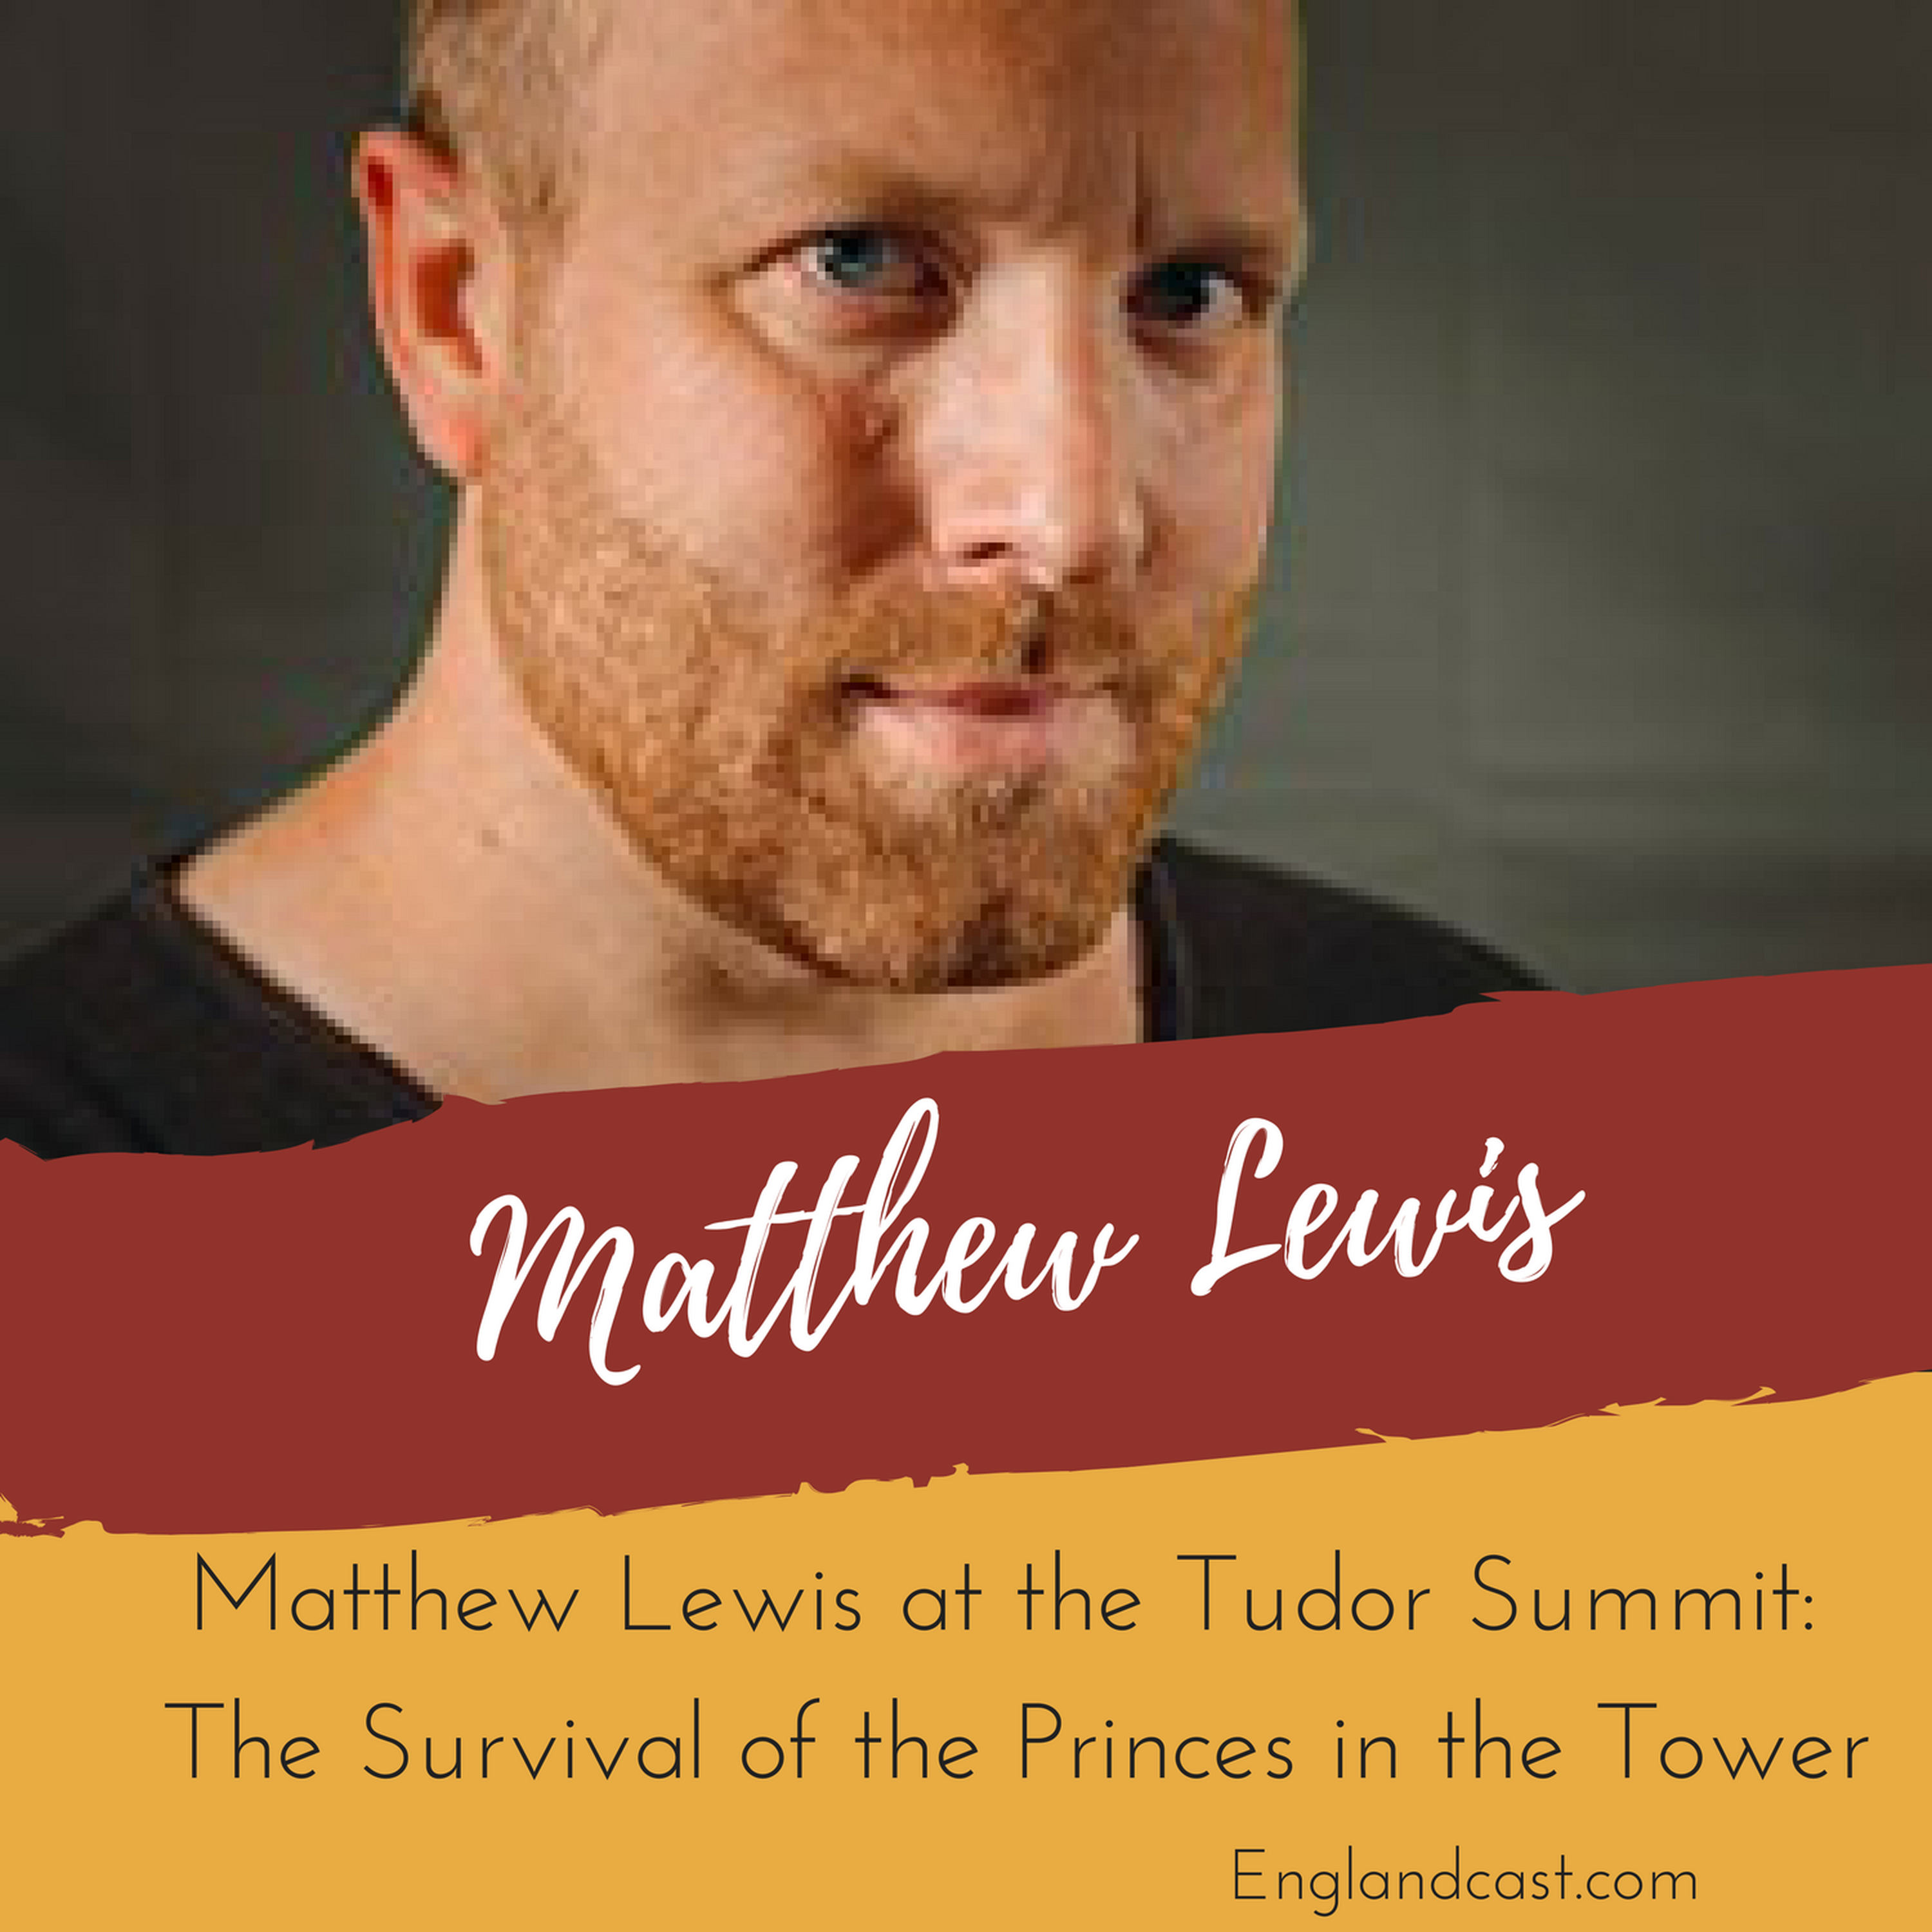 Supplemental: Matthew Lewis - The Survival of the Princes in the Tower